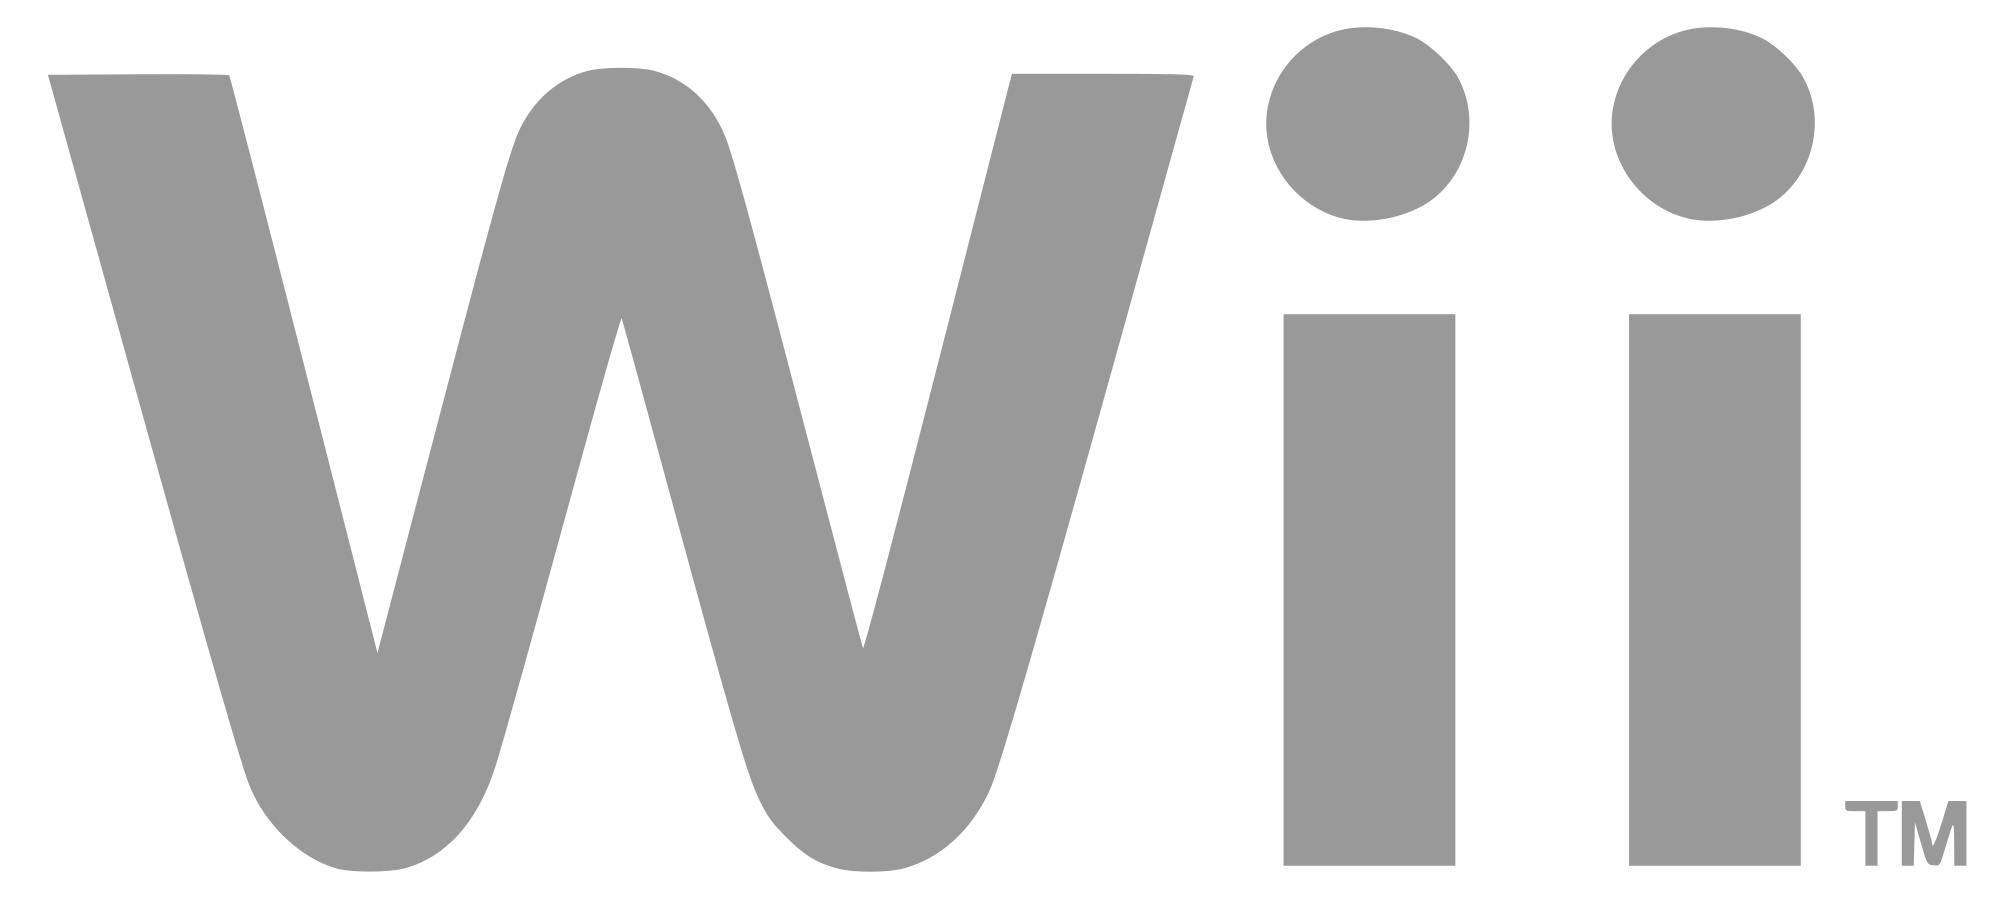 Wii_logo.png